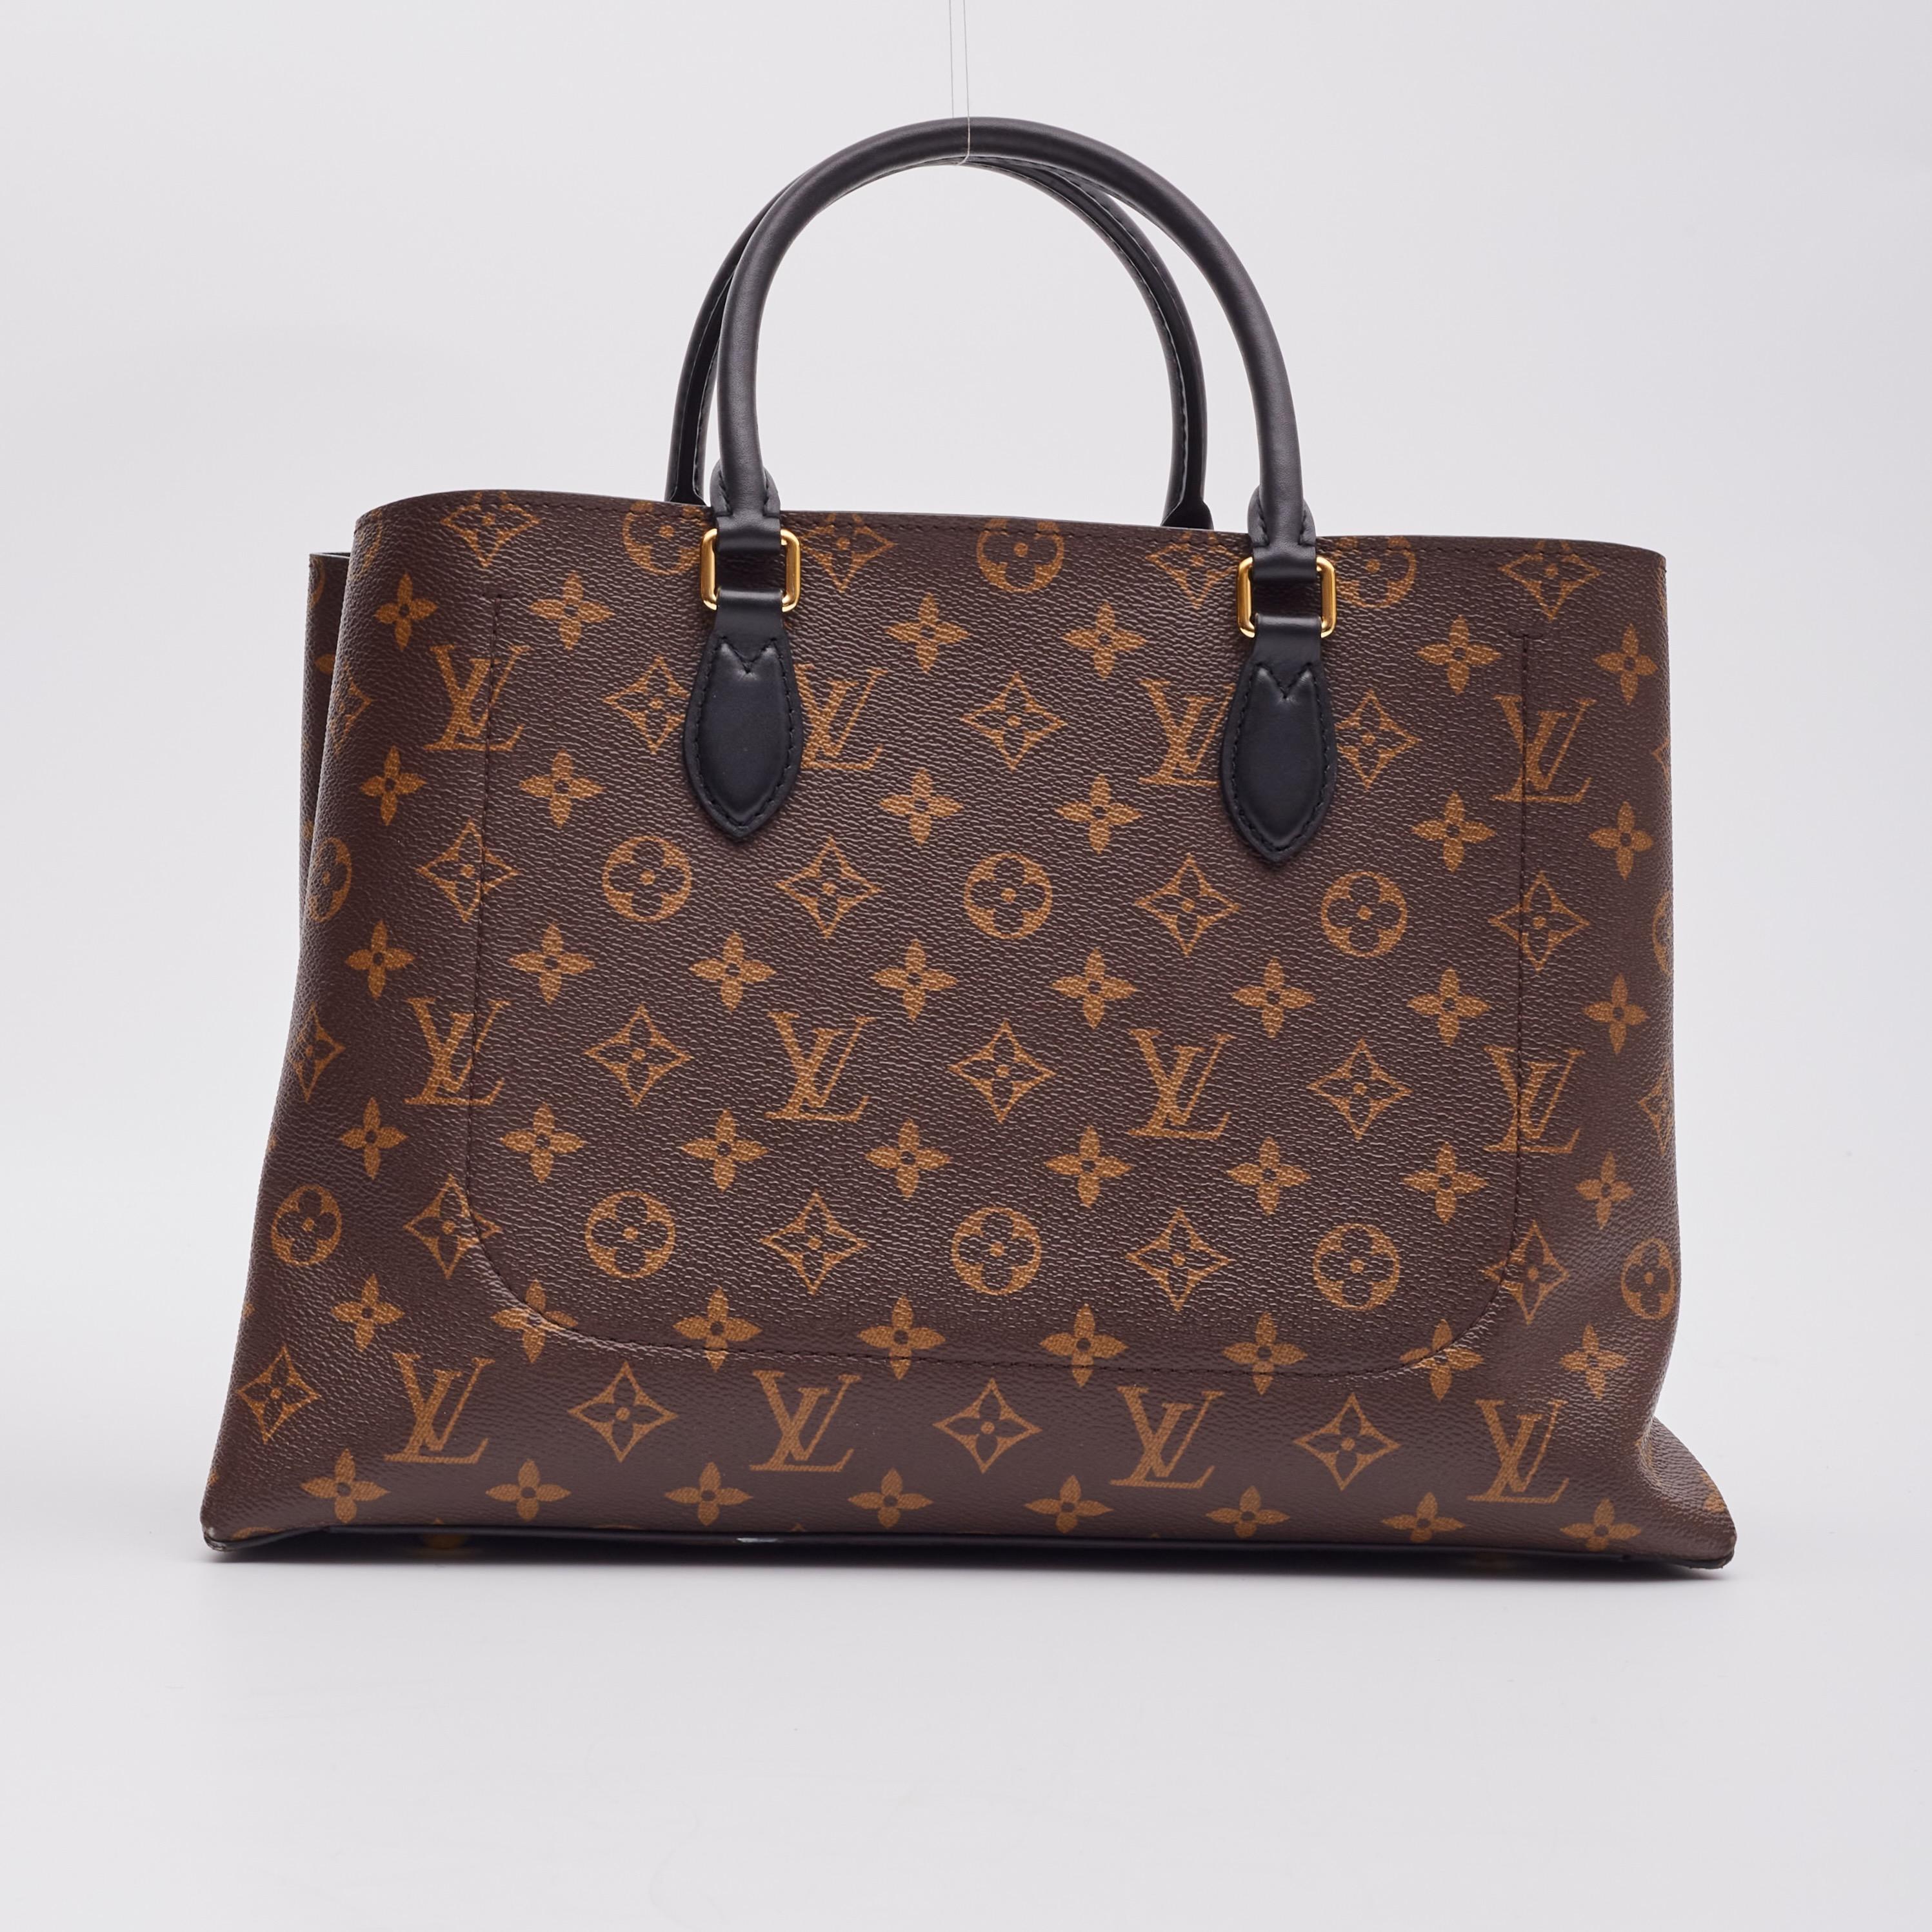 Louis Vuitton Monogram Flower Tote Black Leather Finishes 1